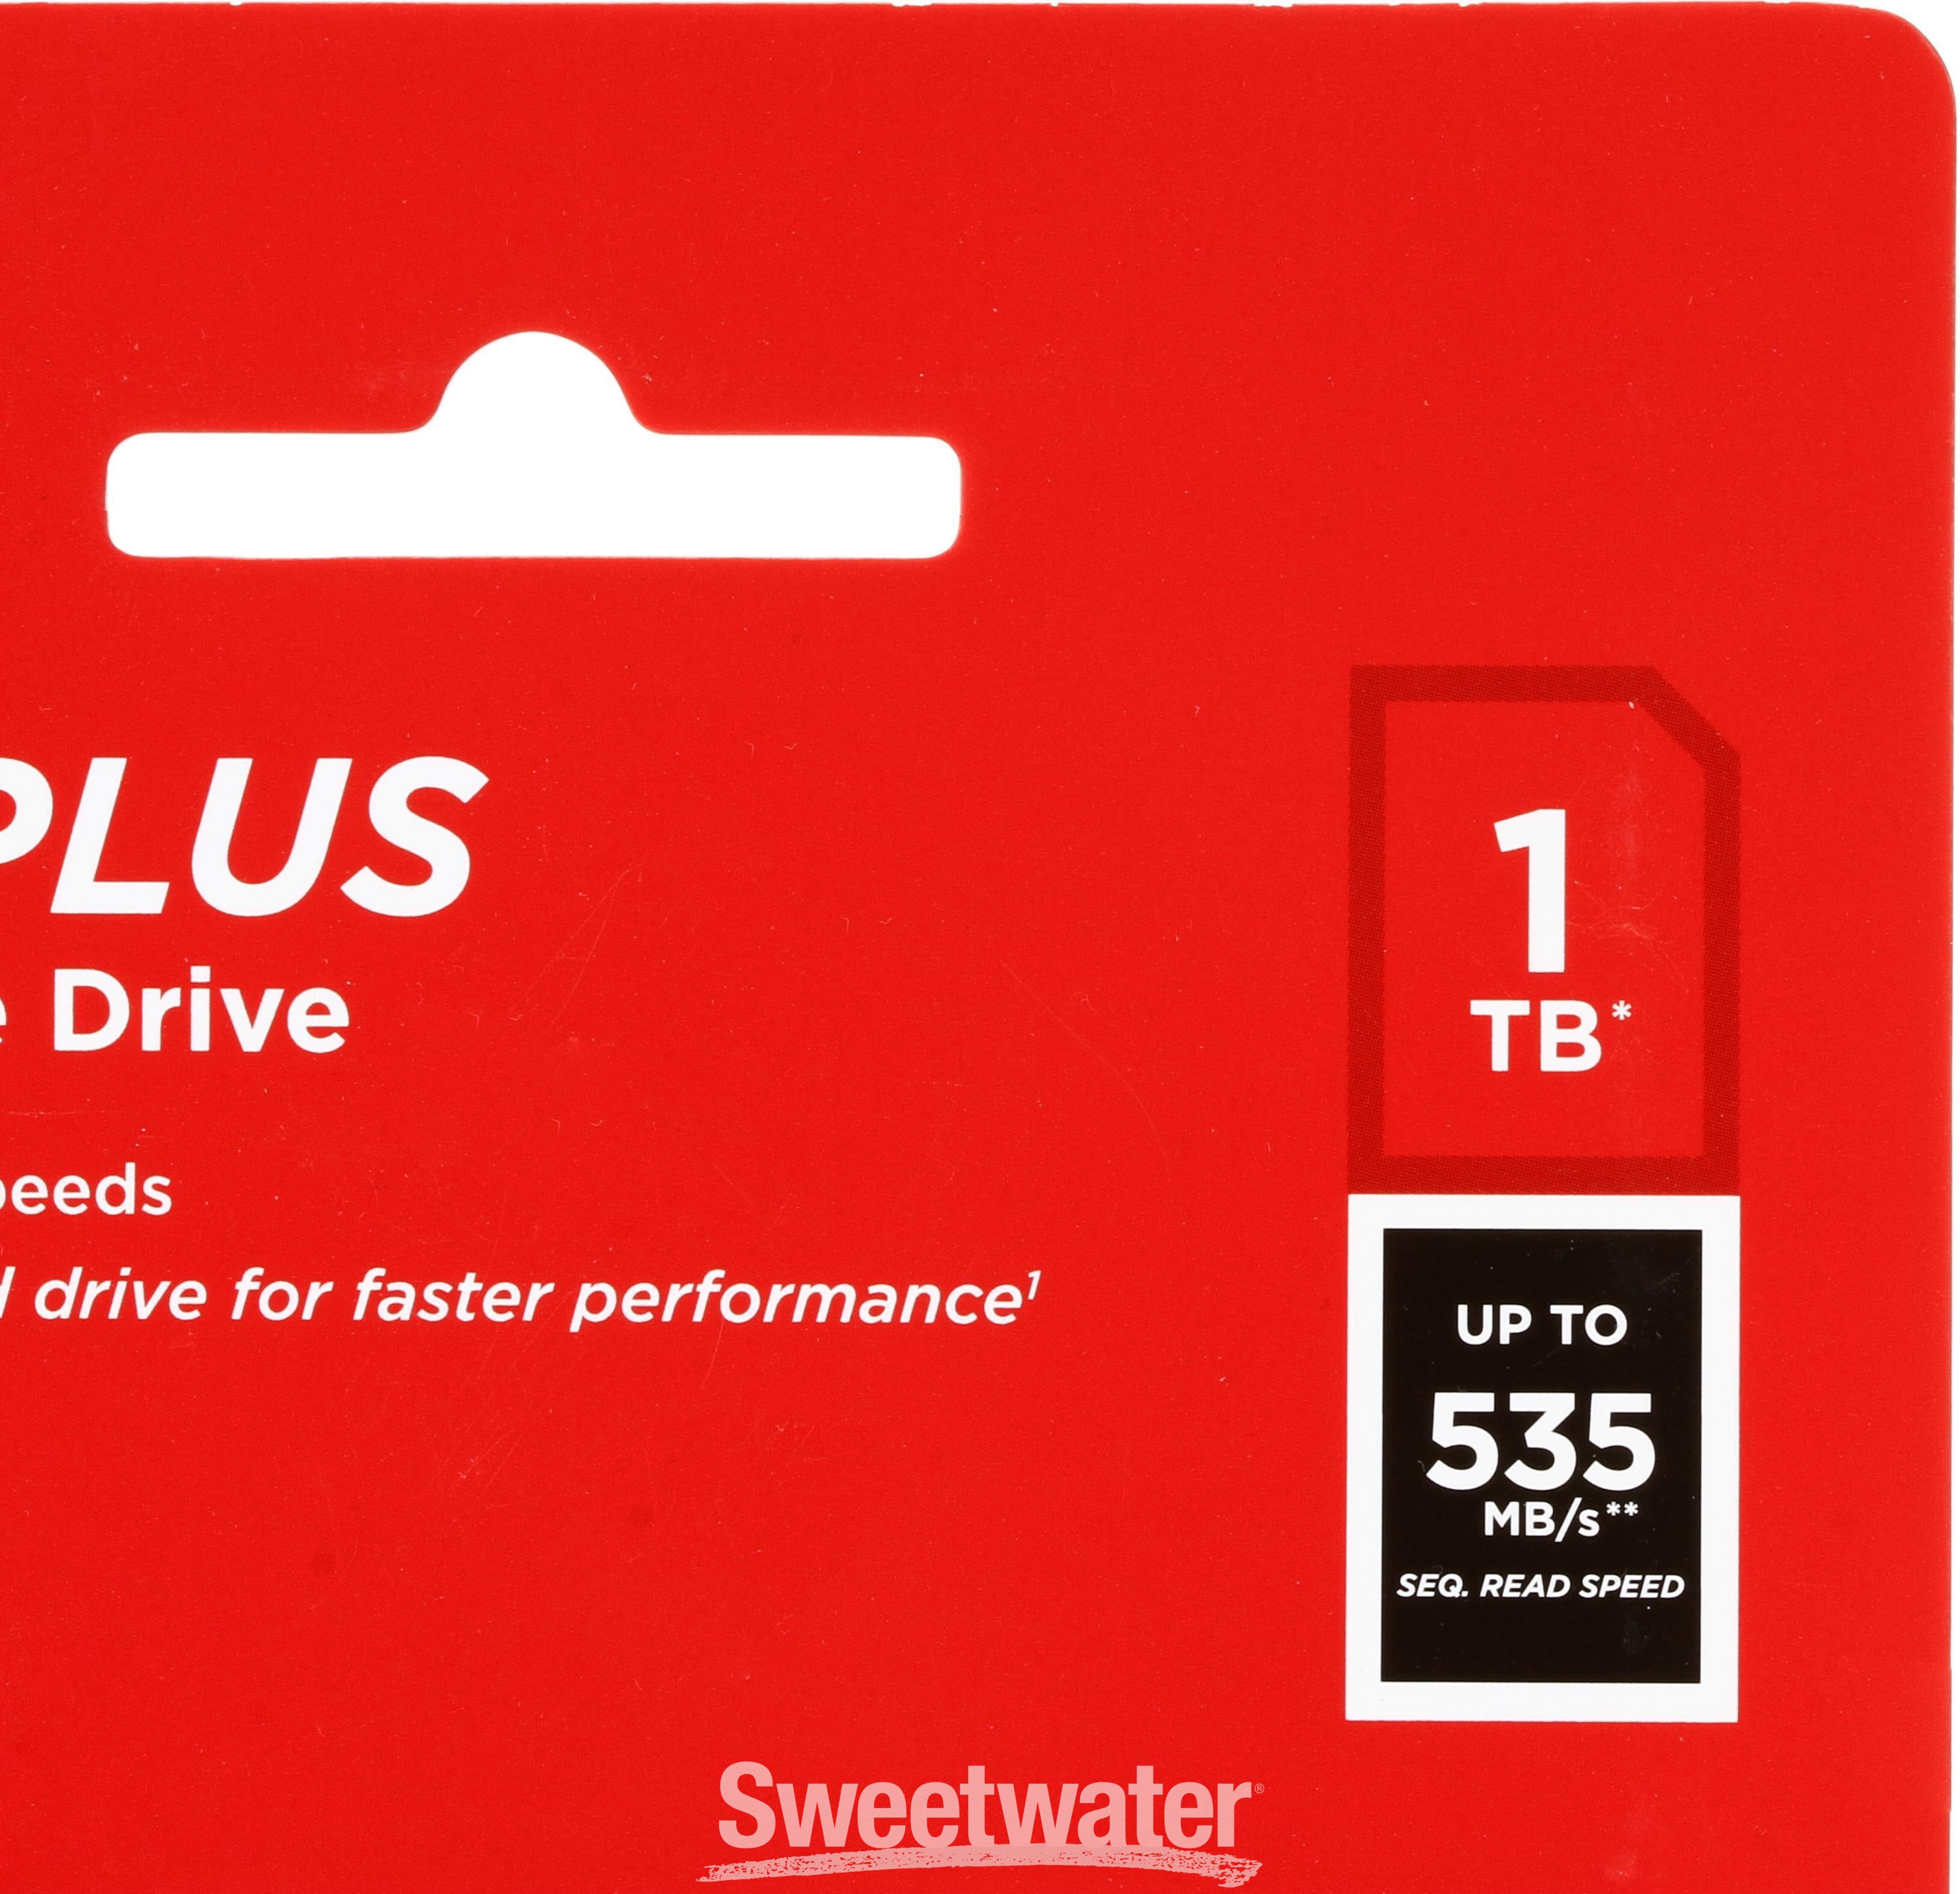 SanDisk SSD Plus 1TB Solid State Drive | Sweetwater